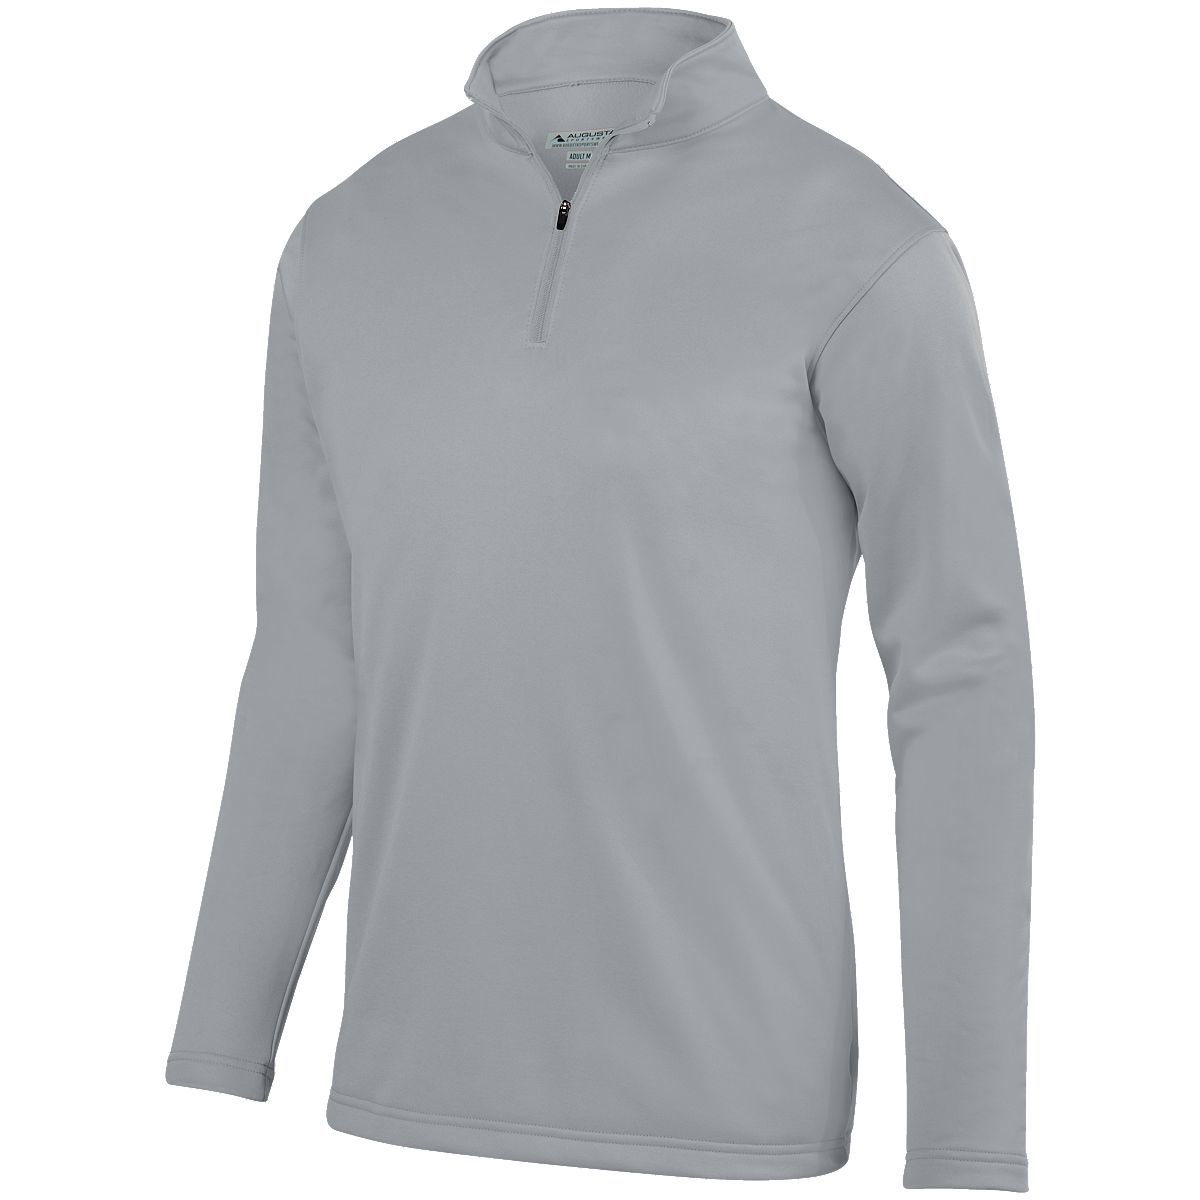 Youth Wicking Fleece Pullover - 5508